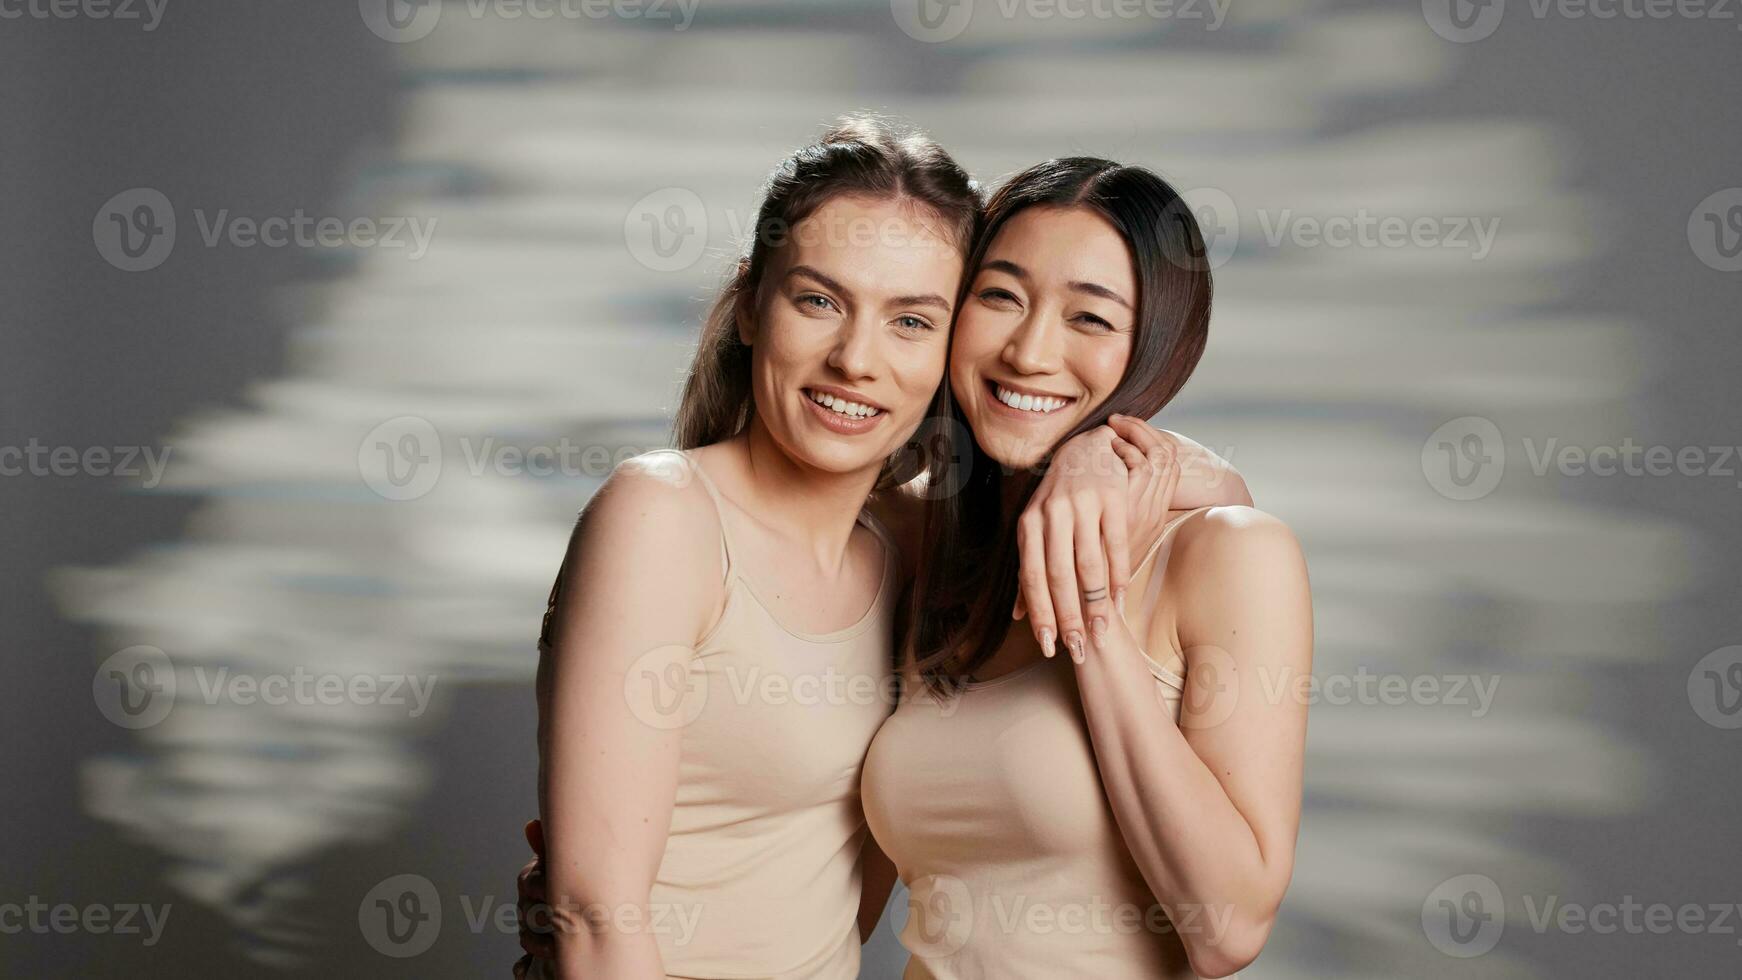 Diverse friends laughing and feeling positive on camera, posing for skincare ad campaign. Happy beautiful women promoting body acceptance and self confidence with beauty routine. photo